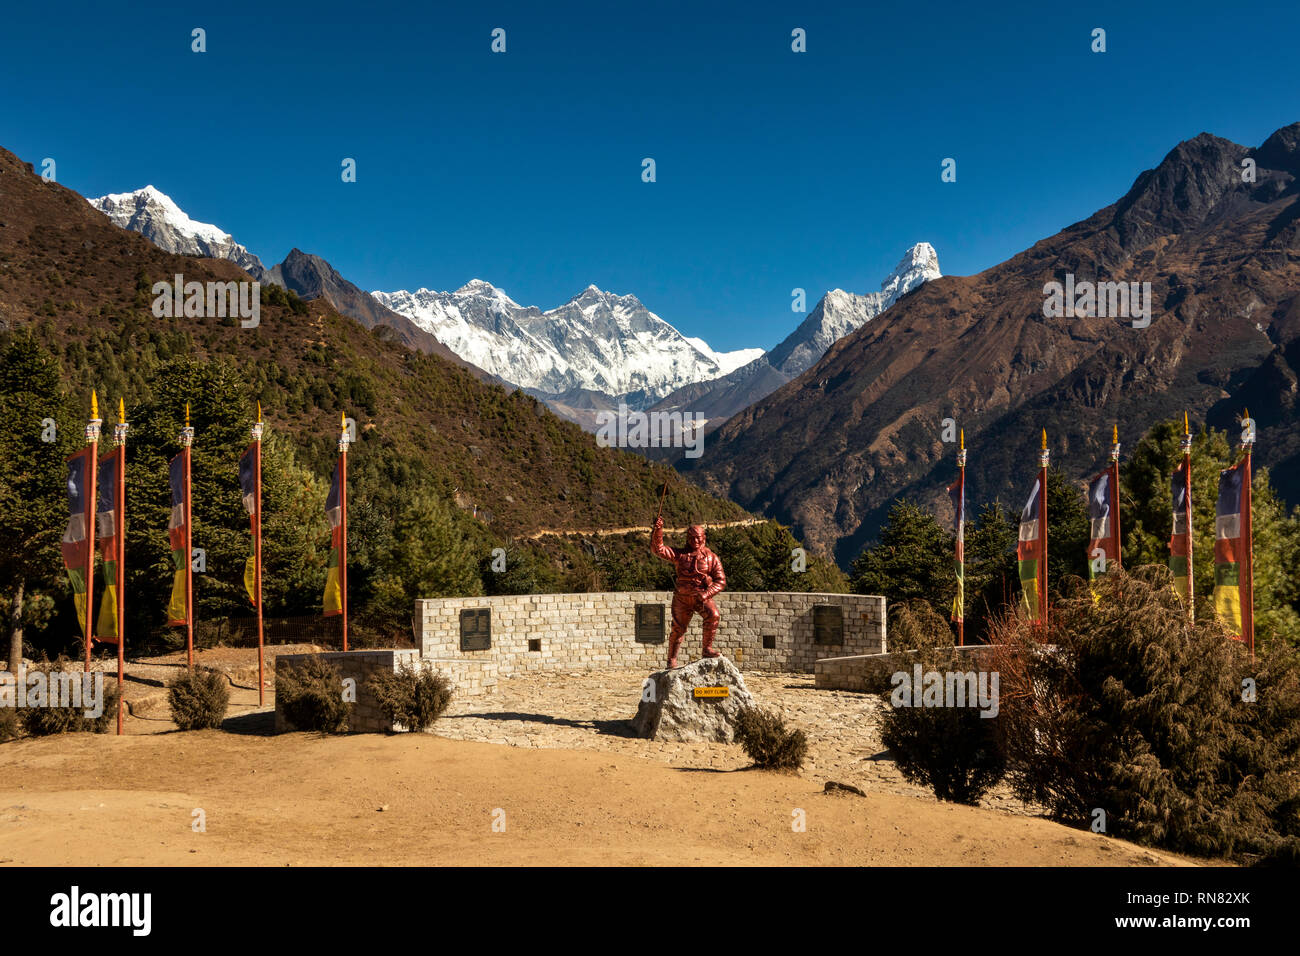 Nepal, Namche Bazaar, Sagarmatha National Park, Visitor Centre, Sherpa Tenzing Norgay memorial statue with Mount Everest behind Stock Photo